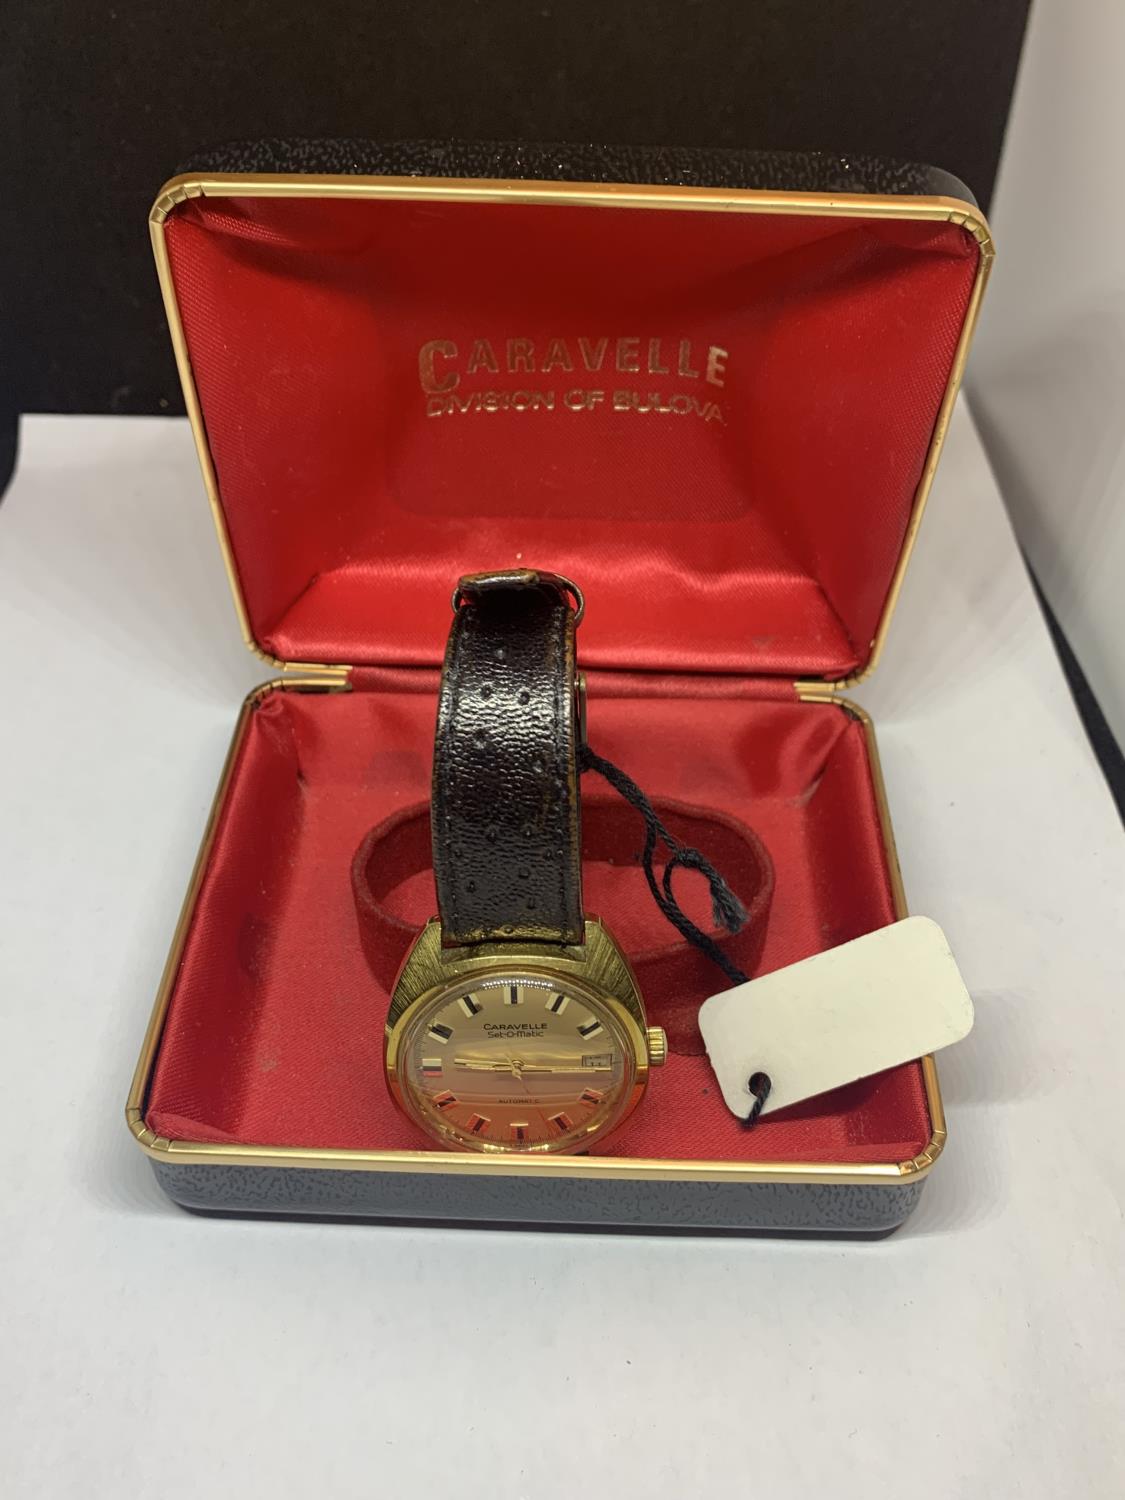 A VINTAGE CARAVELLE SET O MATIC BY BULOVA AUTOMATIC WRIST WATCH WITH LEATHER STRAP IN A